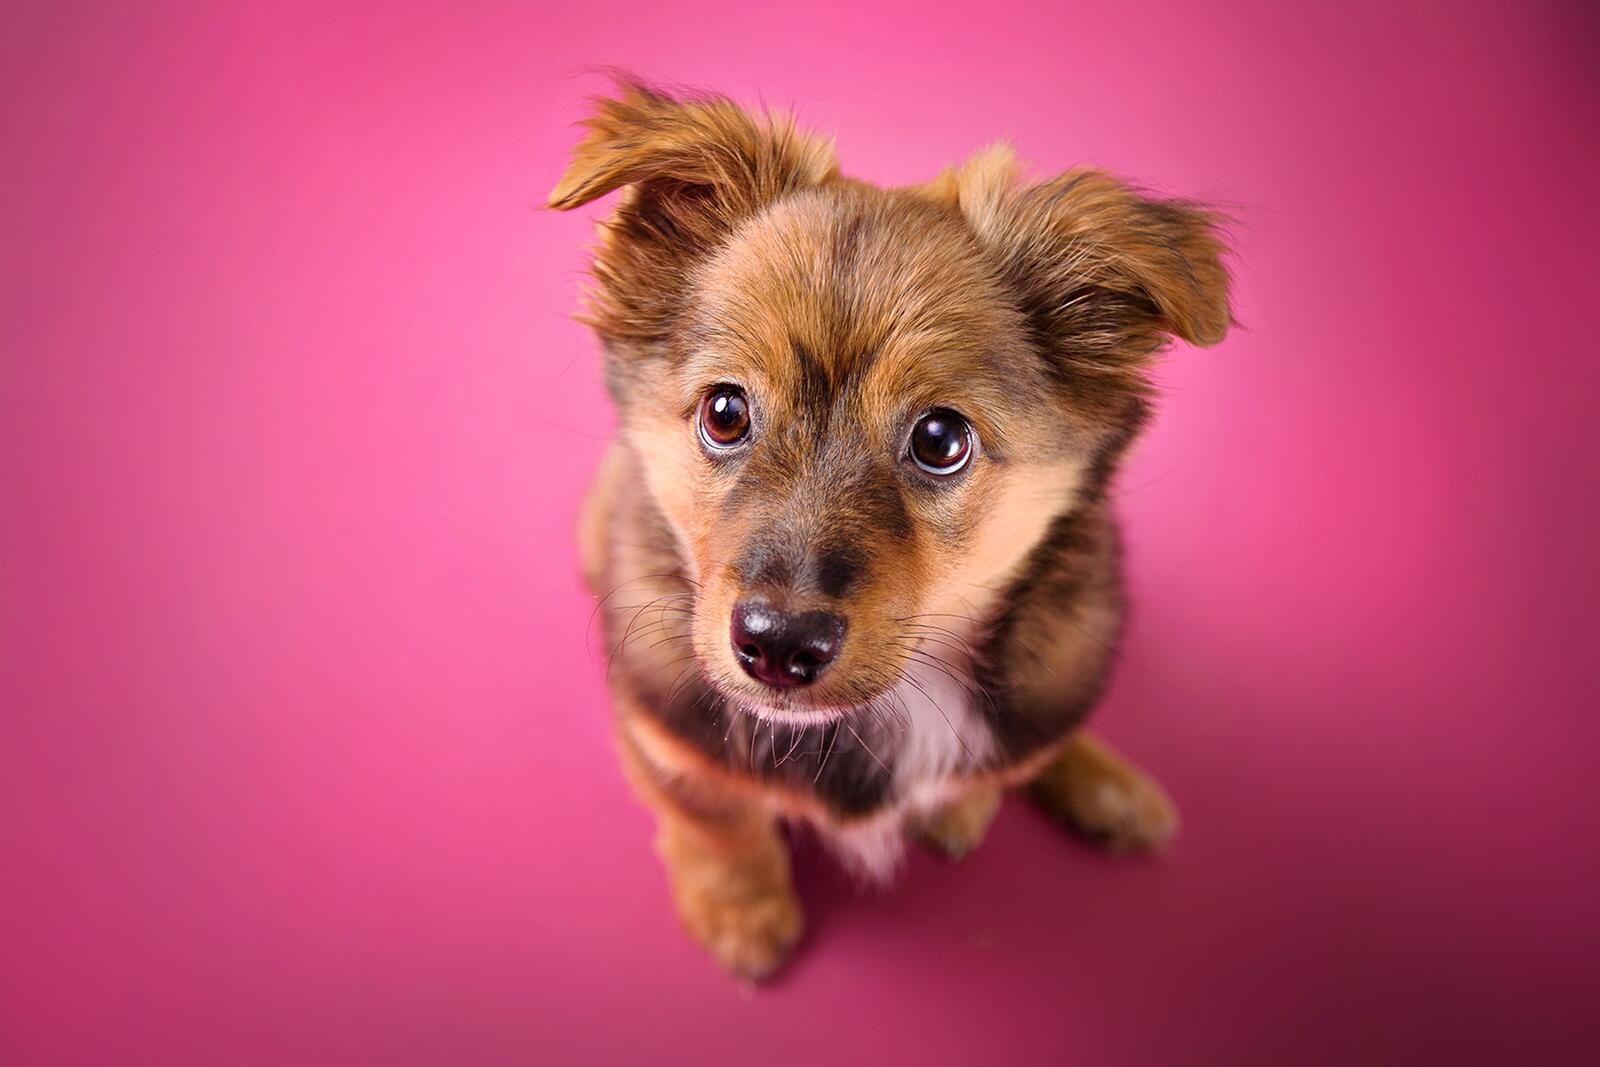 Free photo Puppy on a pink background